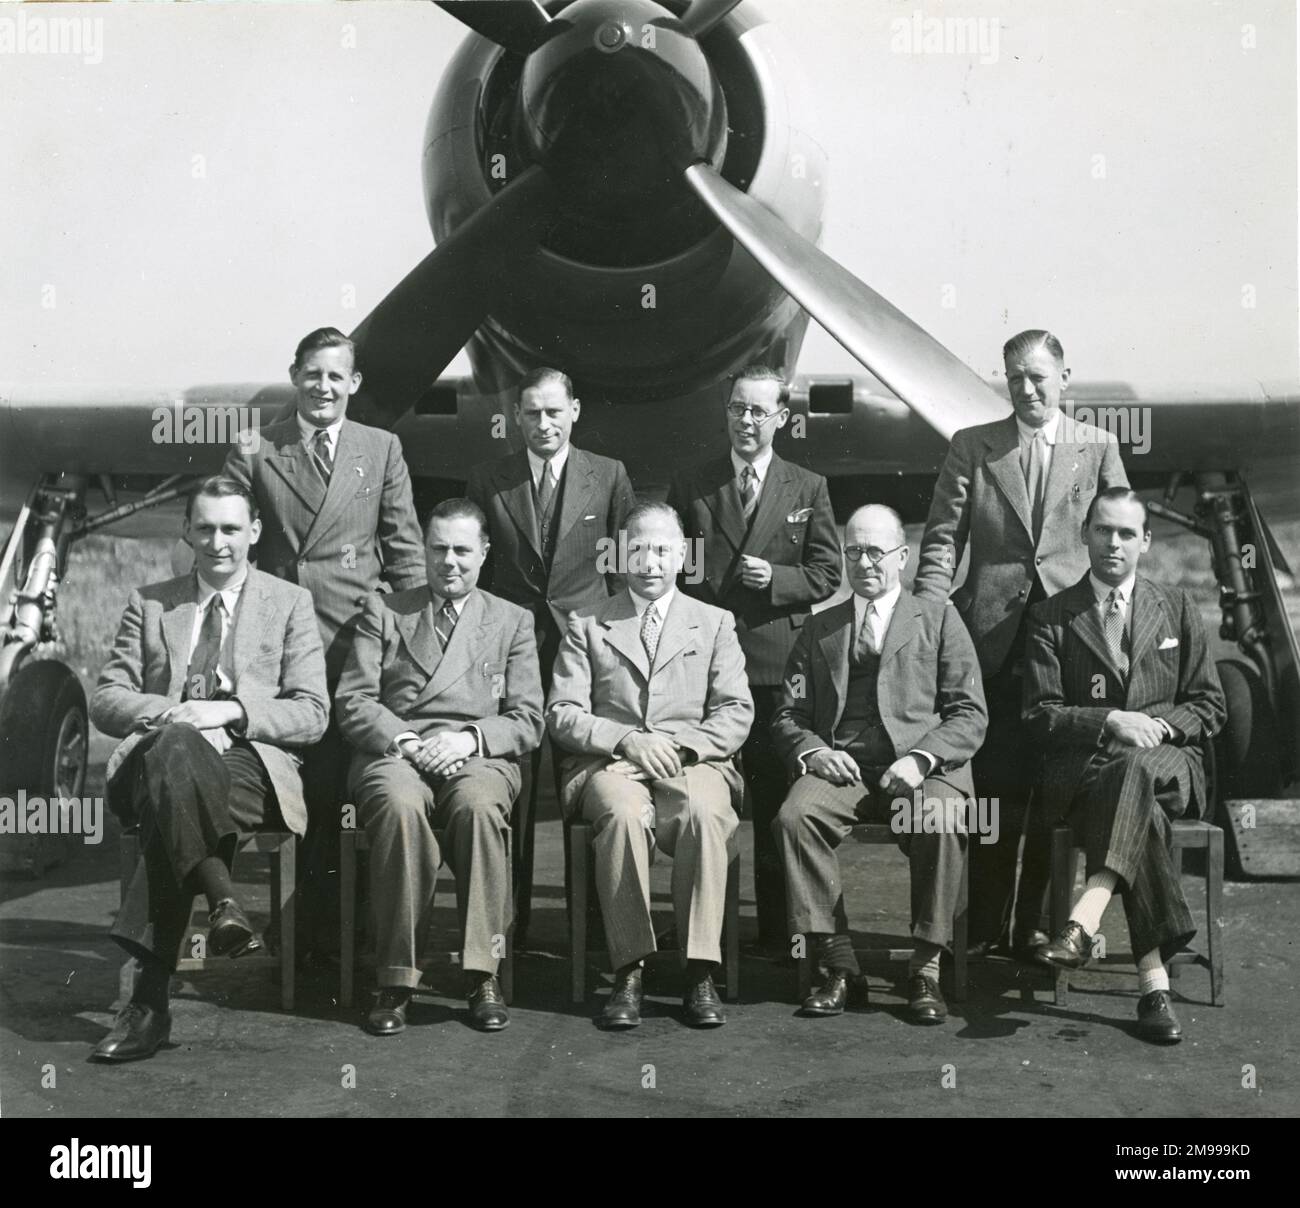 The Napier experimental team in front of Hawker Tempest V, NV768, fitted with an annular radiator, July 1946. Standing: F.S. Lester, Flight Test Engineer; R.C. Marcell, Chief Draughtsman; K.H. Greenly, Project Engineer and S.A. Clark, Chief Inspector. Seated: Mike Randrup, Chief Test Pilot; F.L. Parris, Works Manager; C.L. Cowdrey, Chief Installation Engineer; C.F. Vickers, Chief Designer and J.B. Waite, Liaison Engineer. Stock Photo